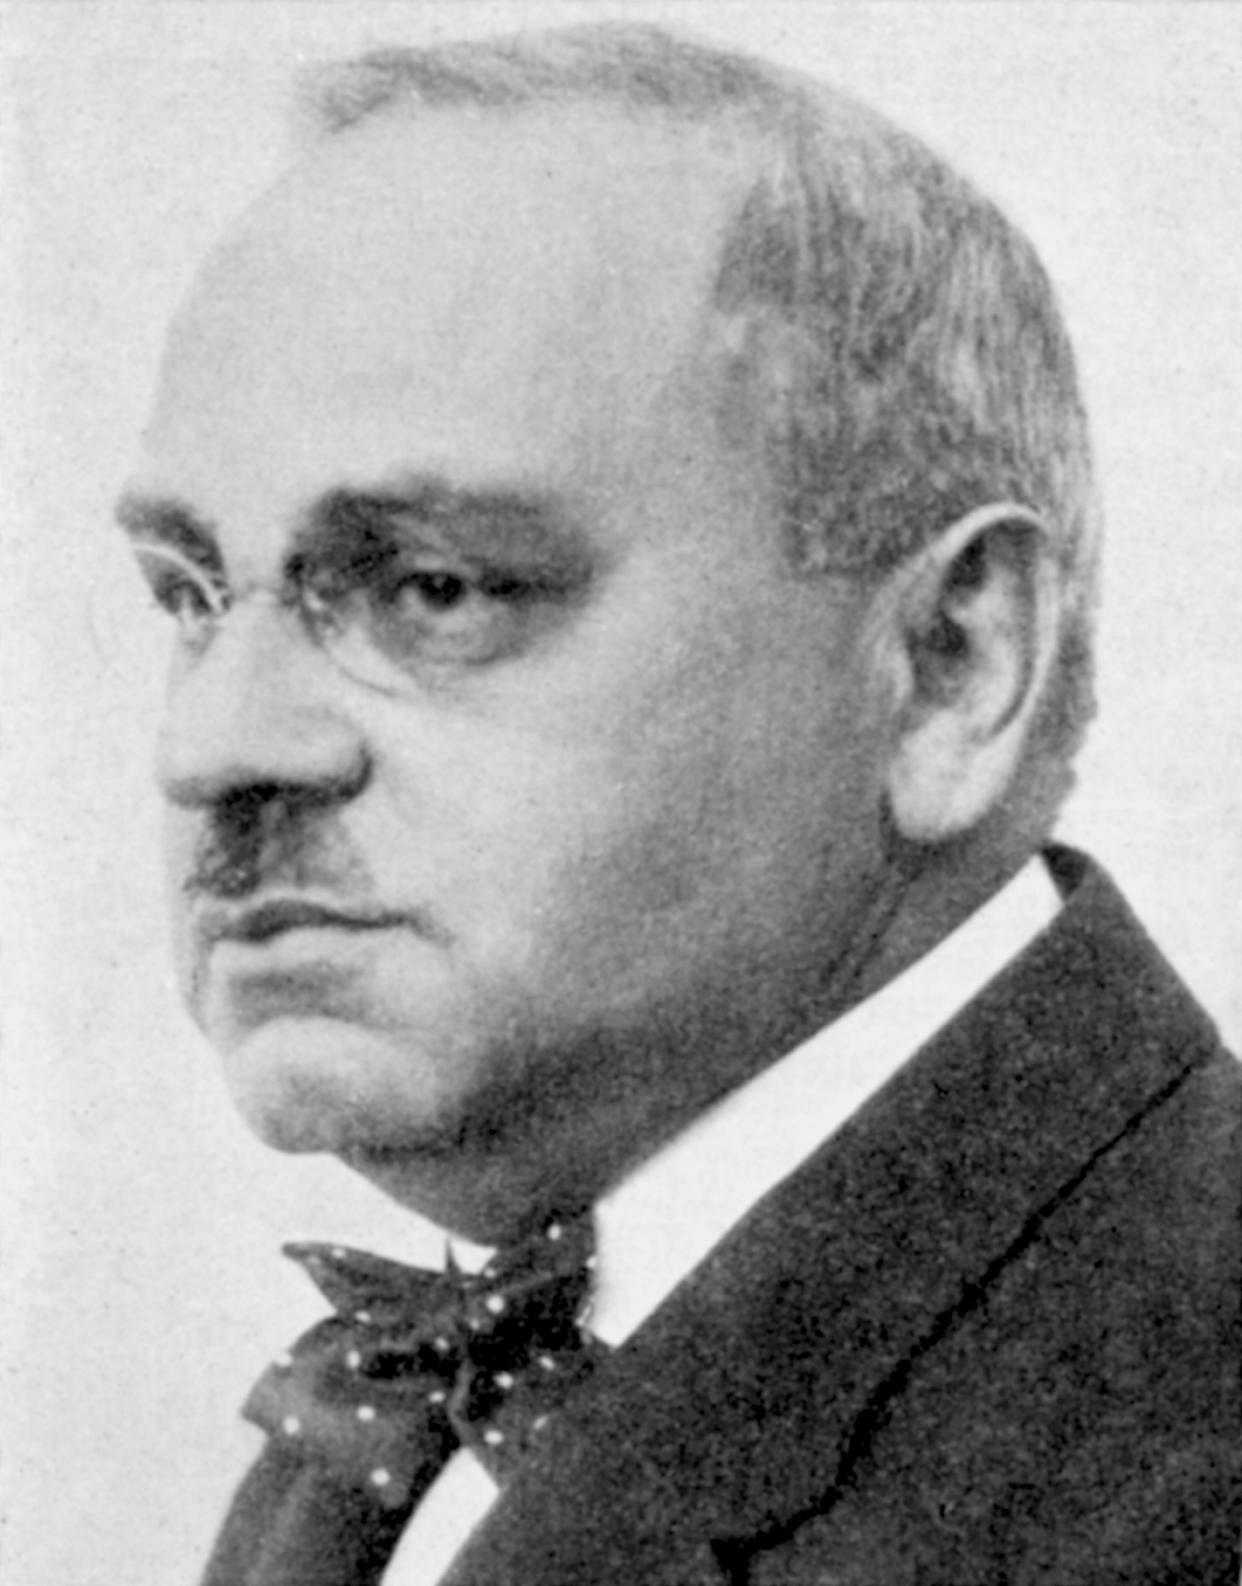 Alfred Adler  (1870-1937) Austrian psychiatrist
Member of group around Freud until he broke away in 1911 and developed theory of Individual Psychology. (Photo by: Photo12/Universal Images Group via Getty Images)